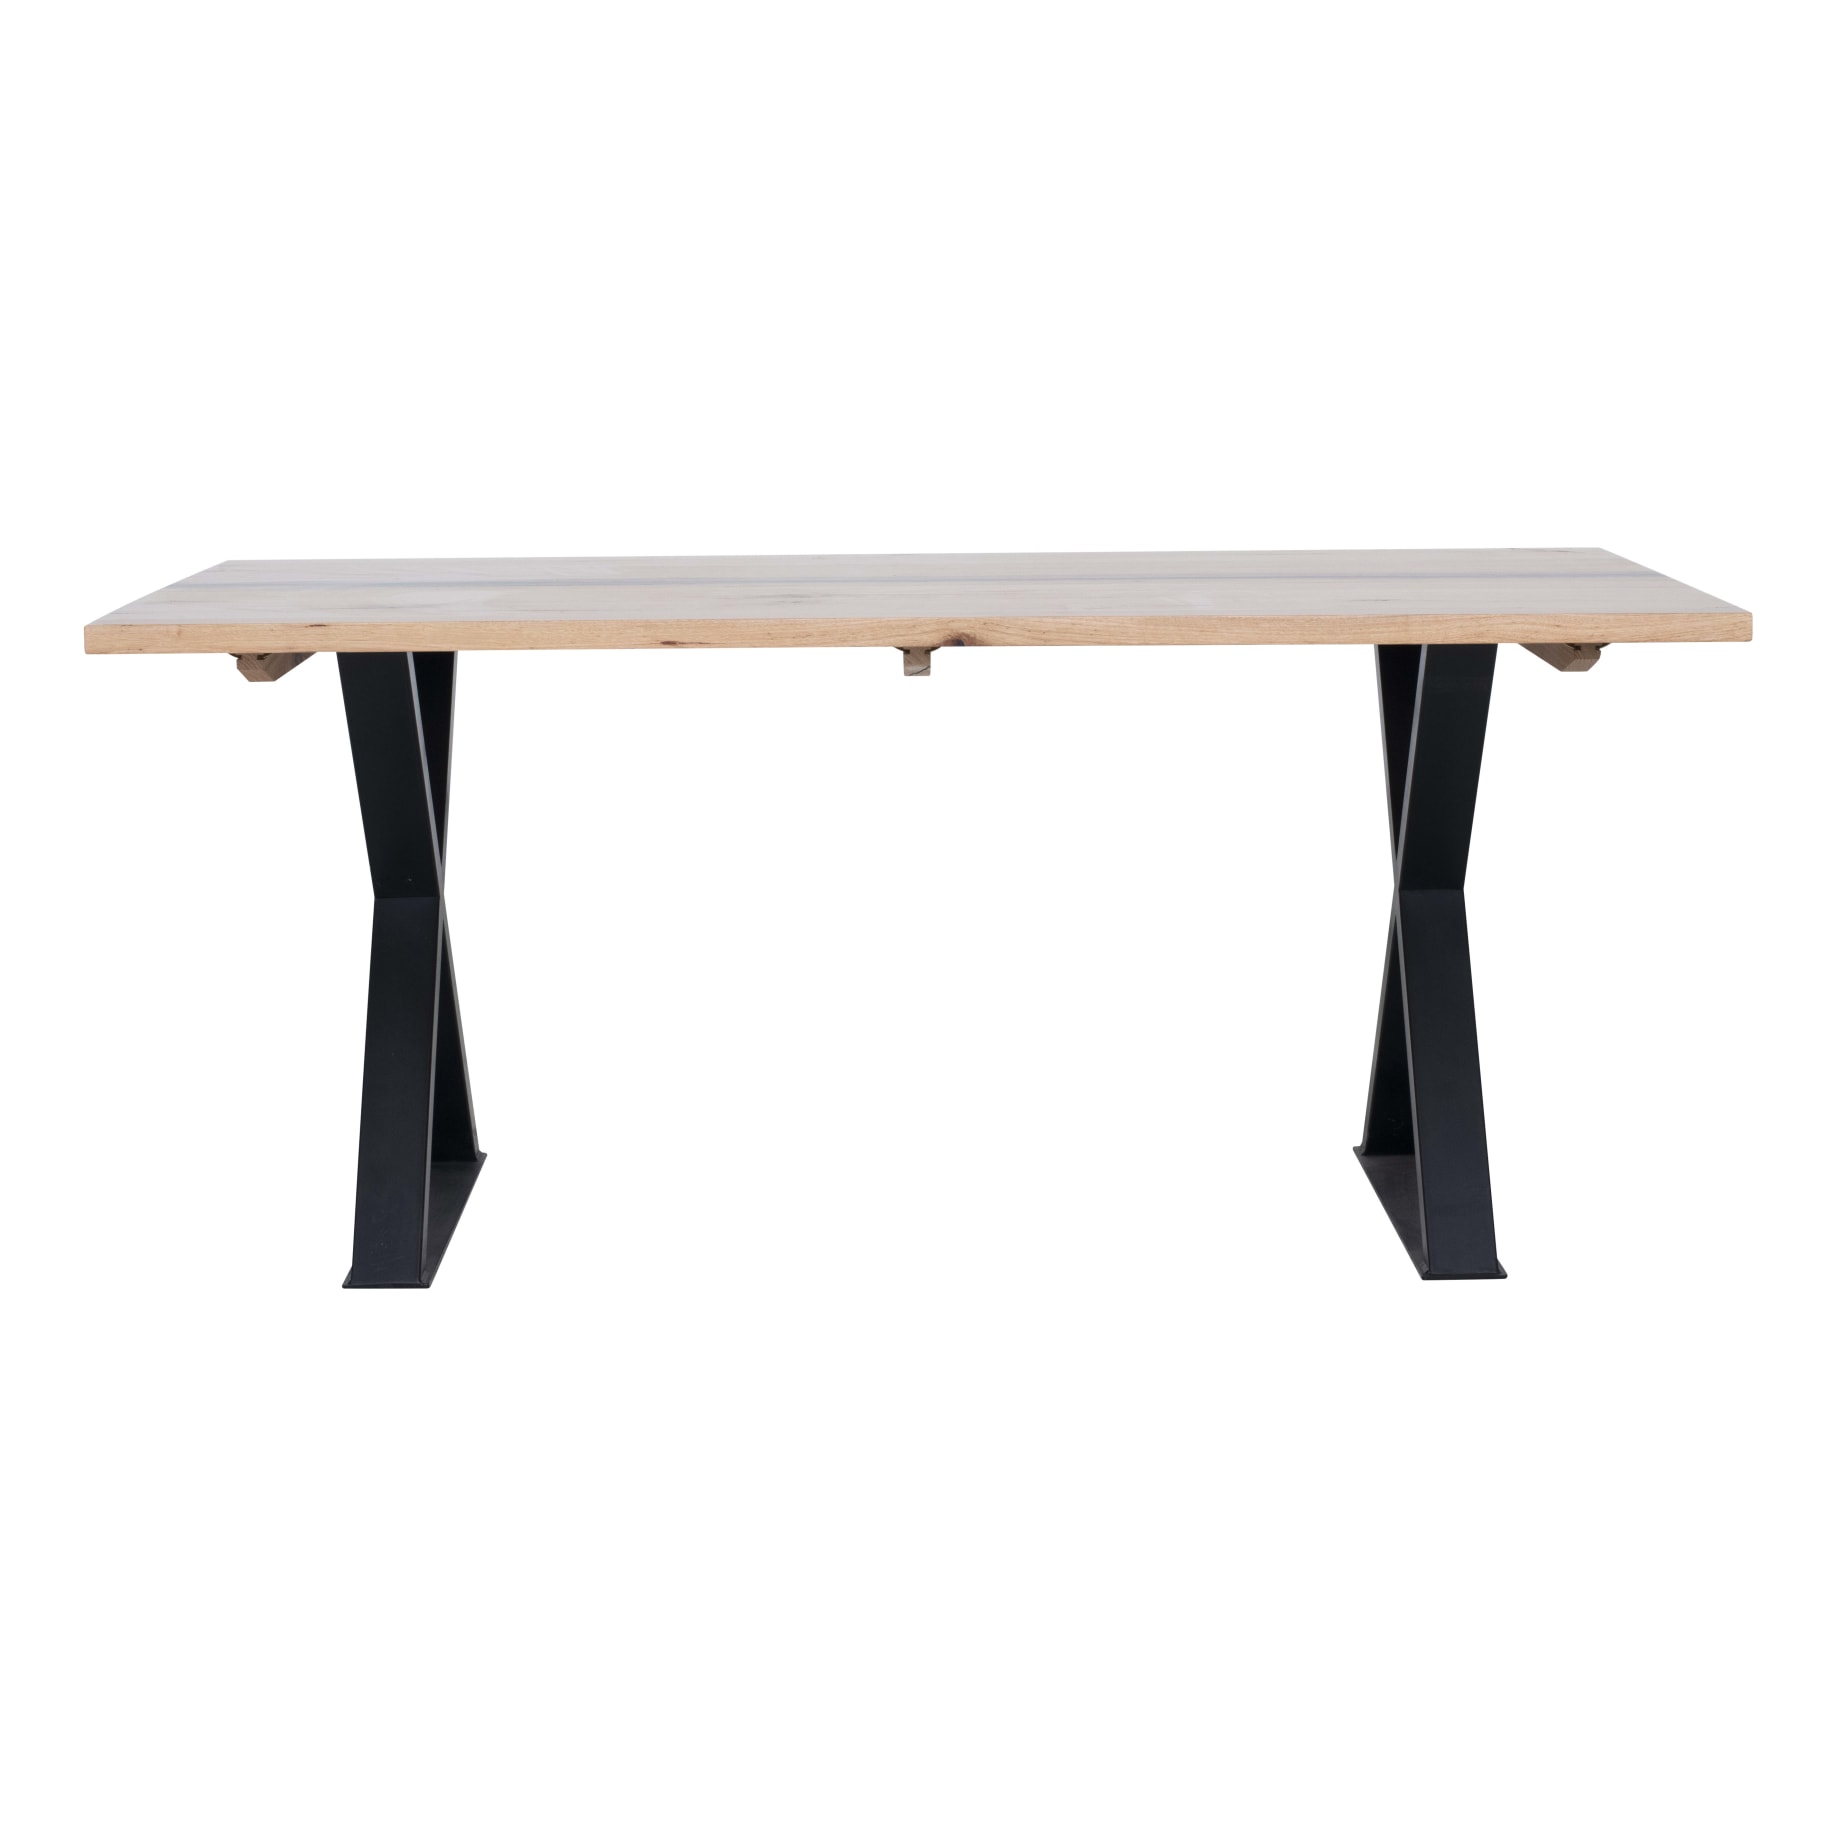 Rawson Dining Table 240cm in Messmate W/ Resin